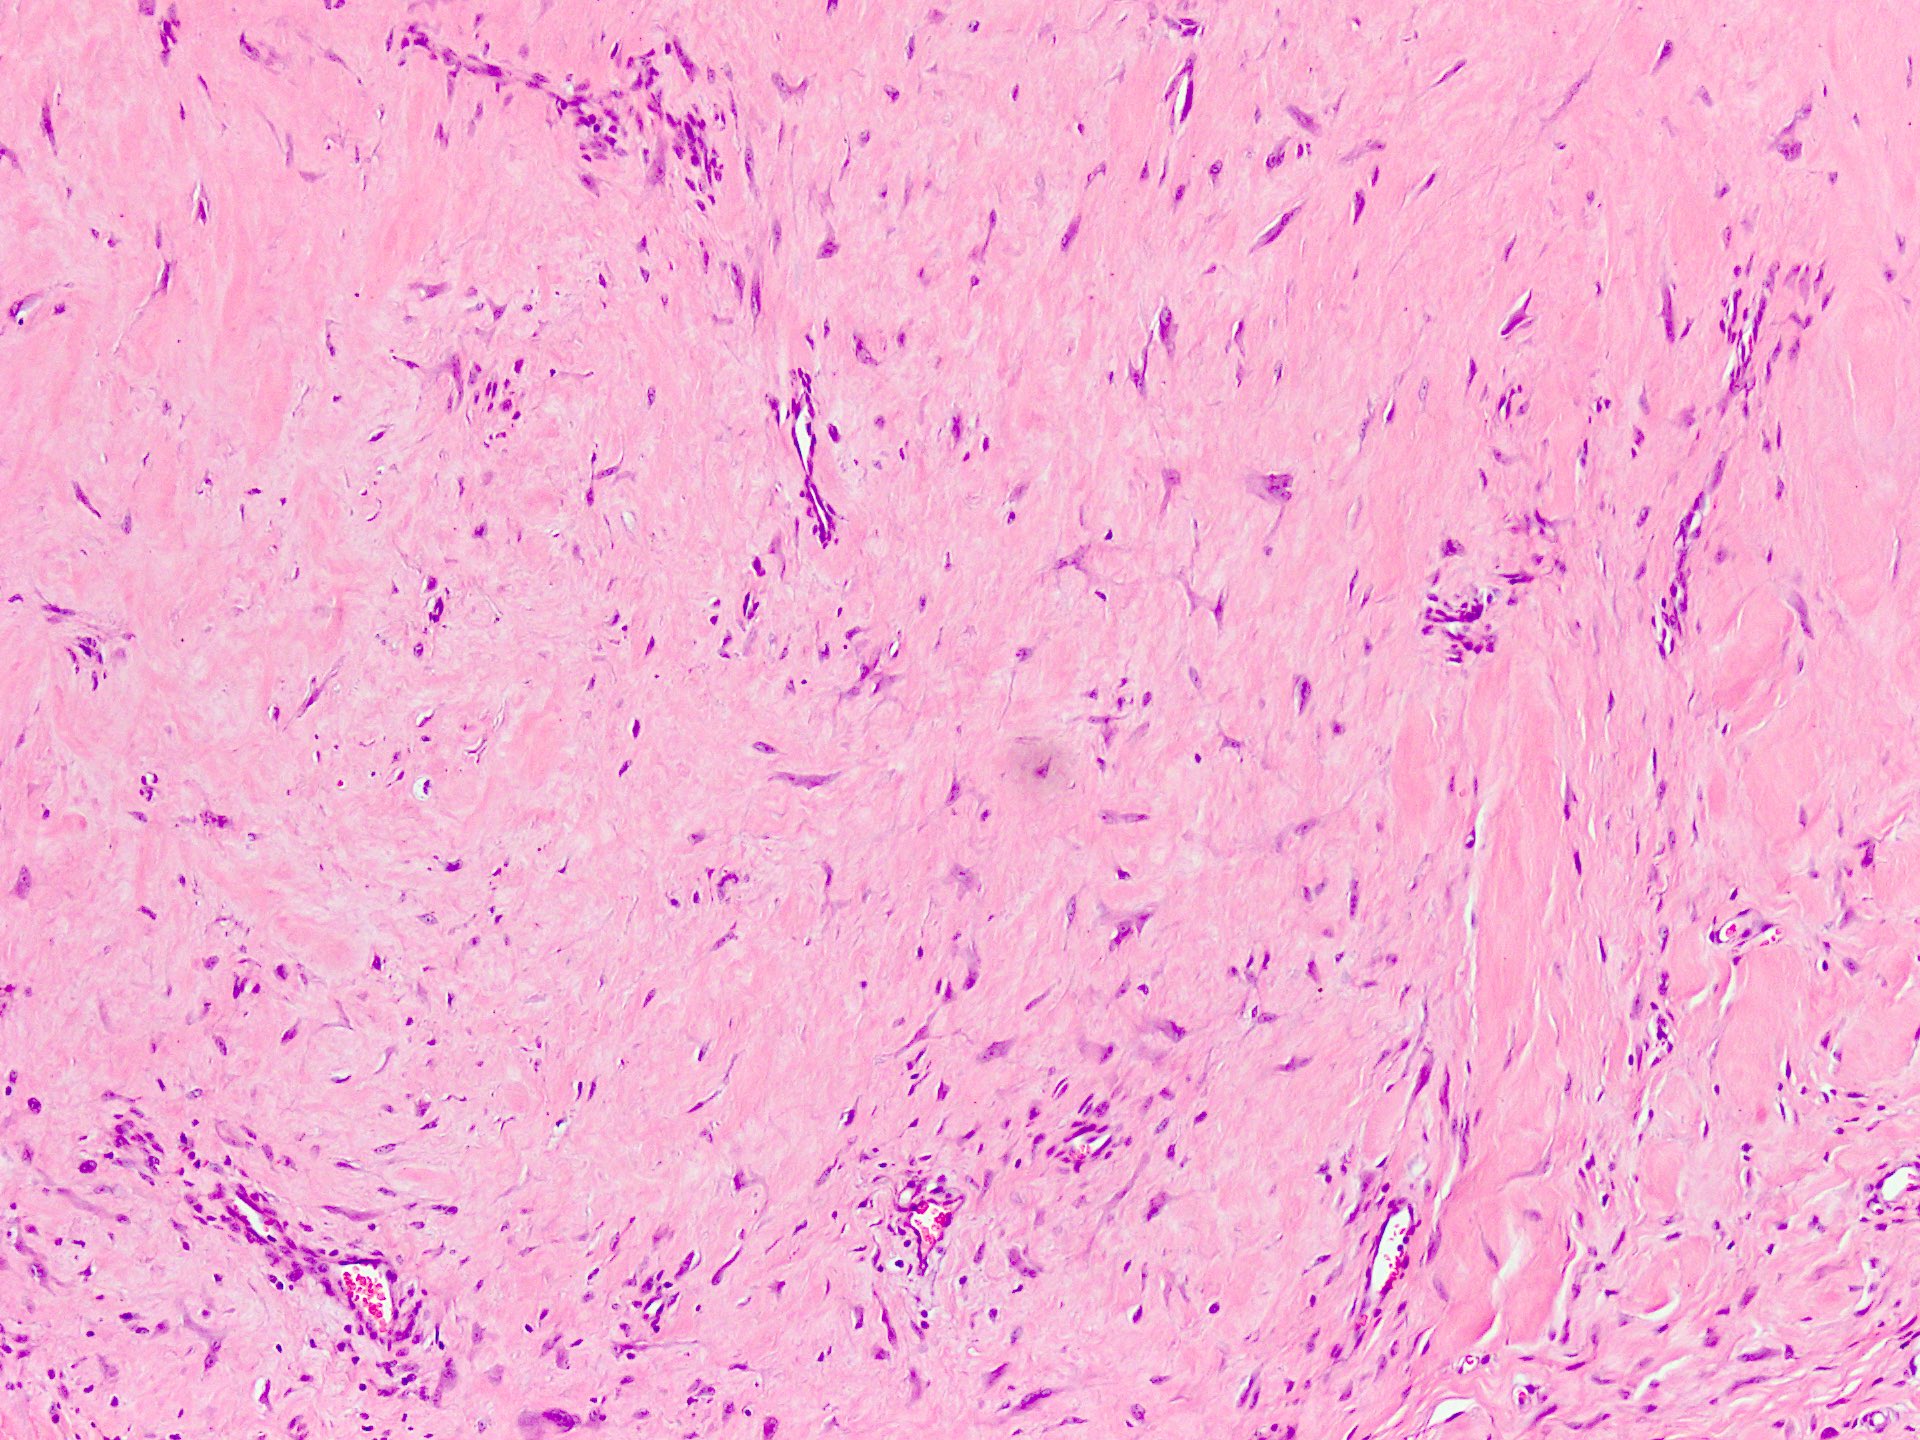 Paucicellular lesion with collagenous stroma